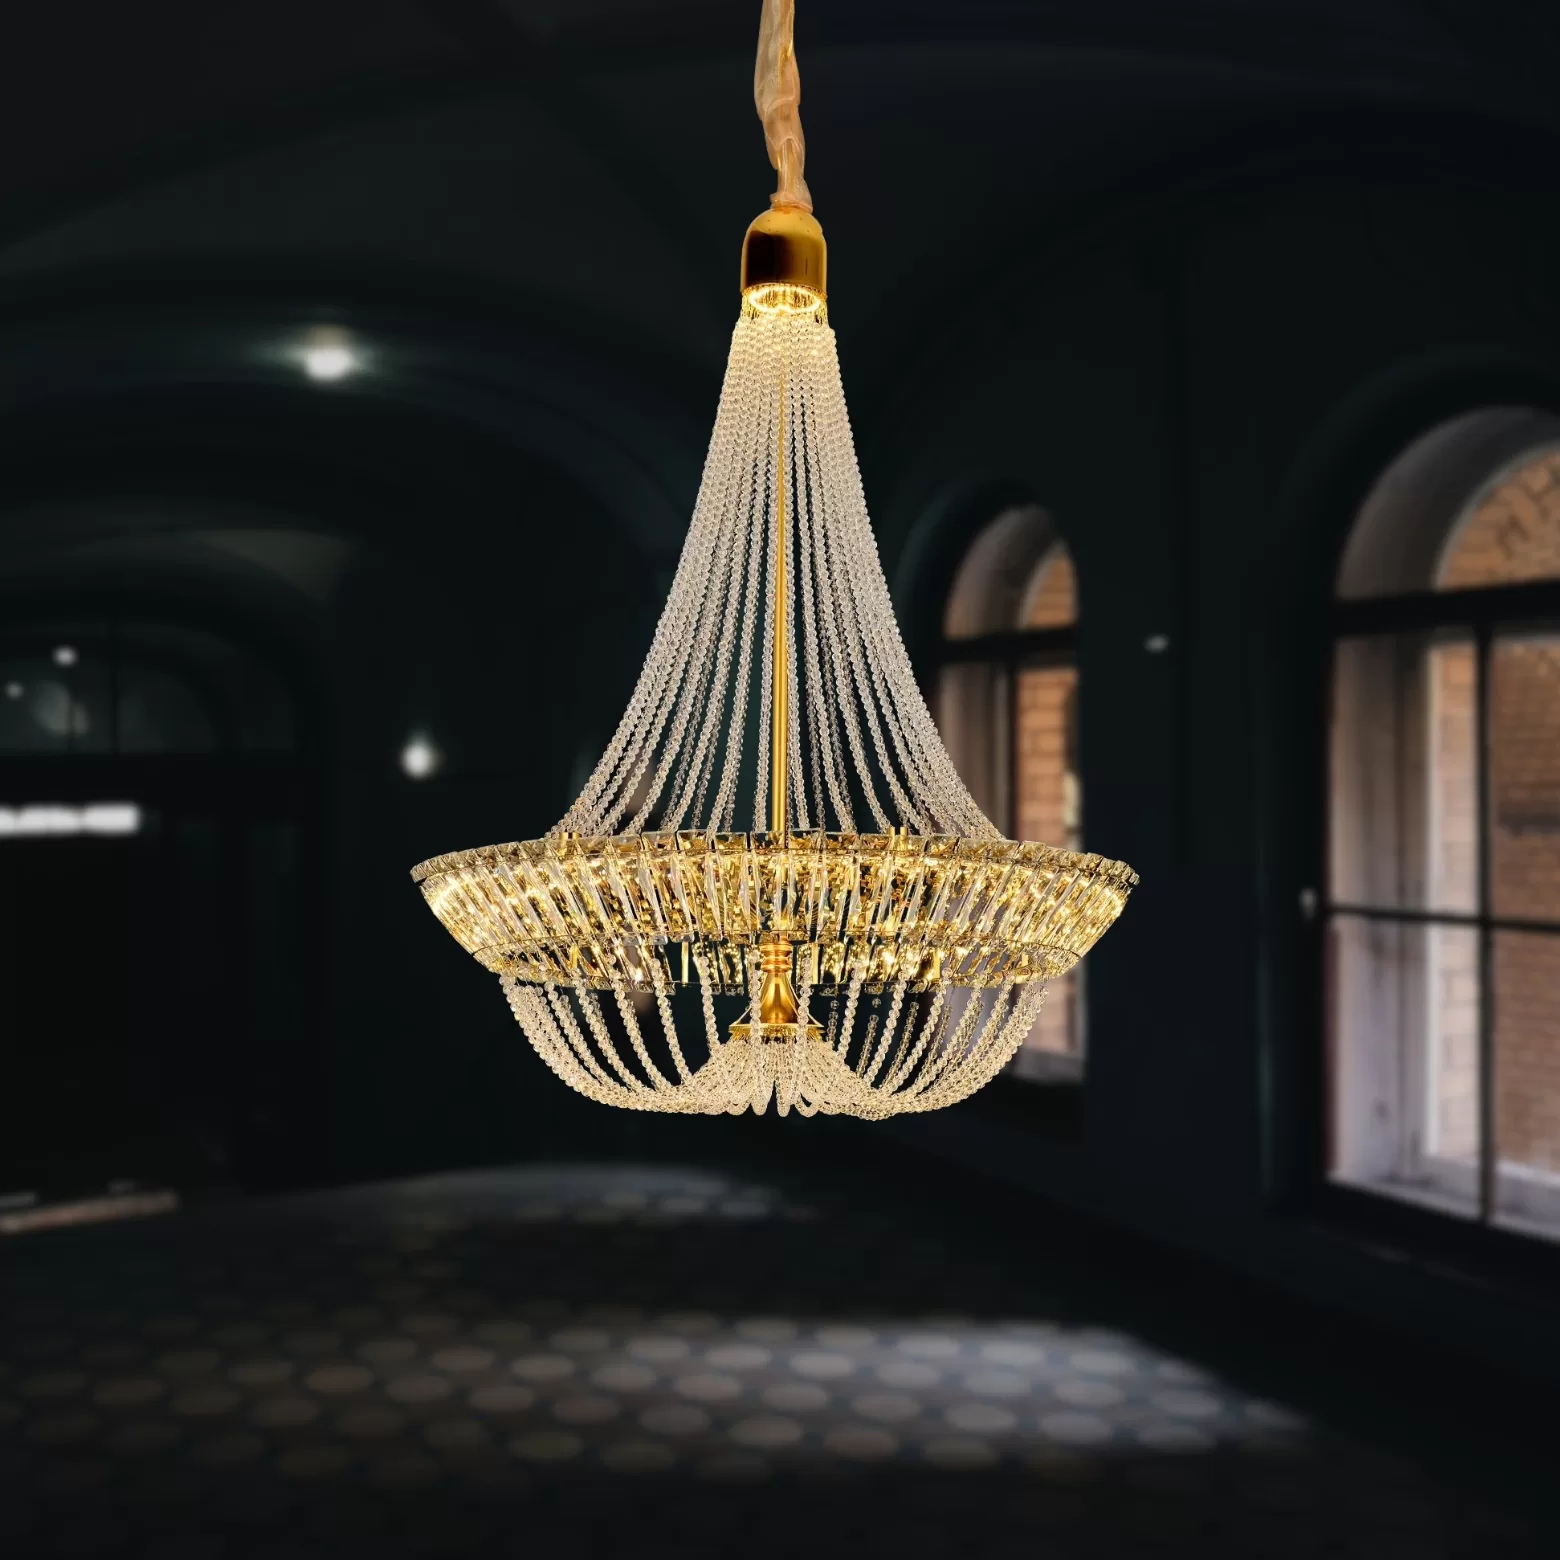 Large crystal chandelier E14 bulb type